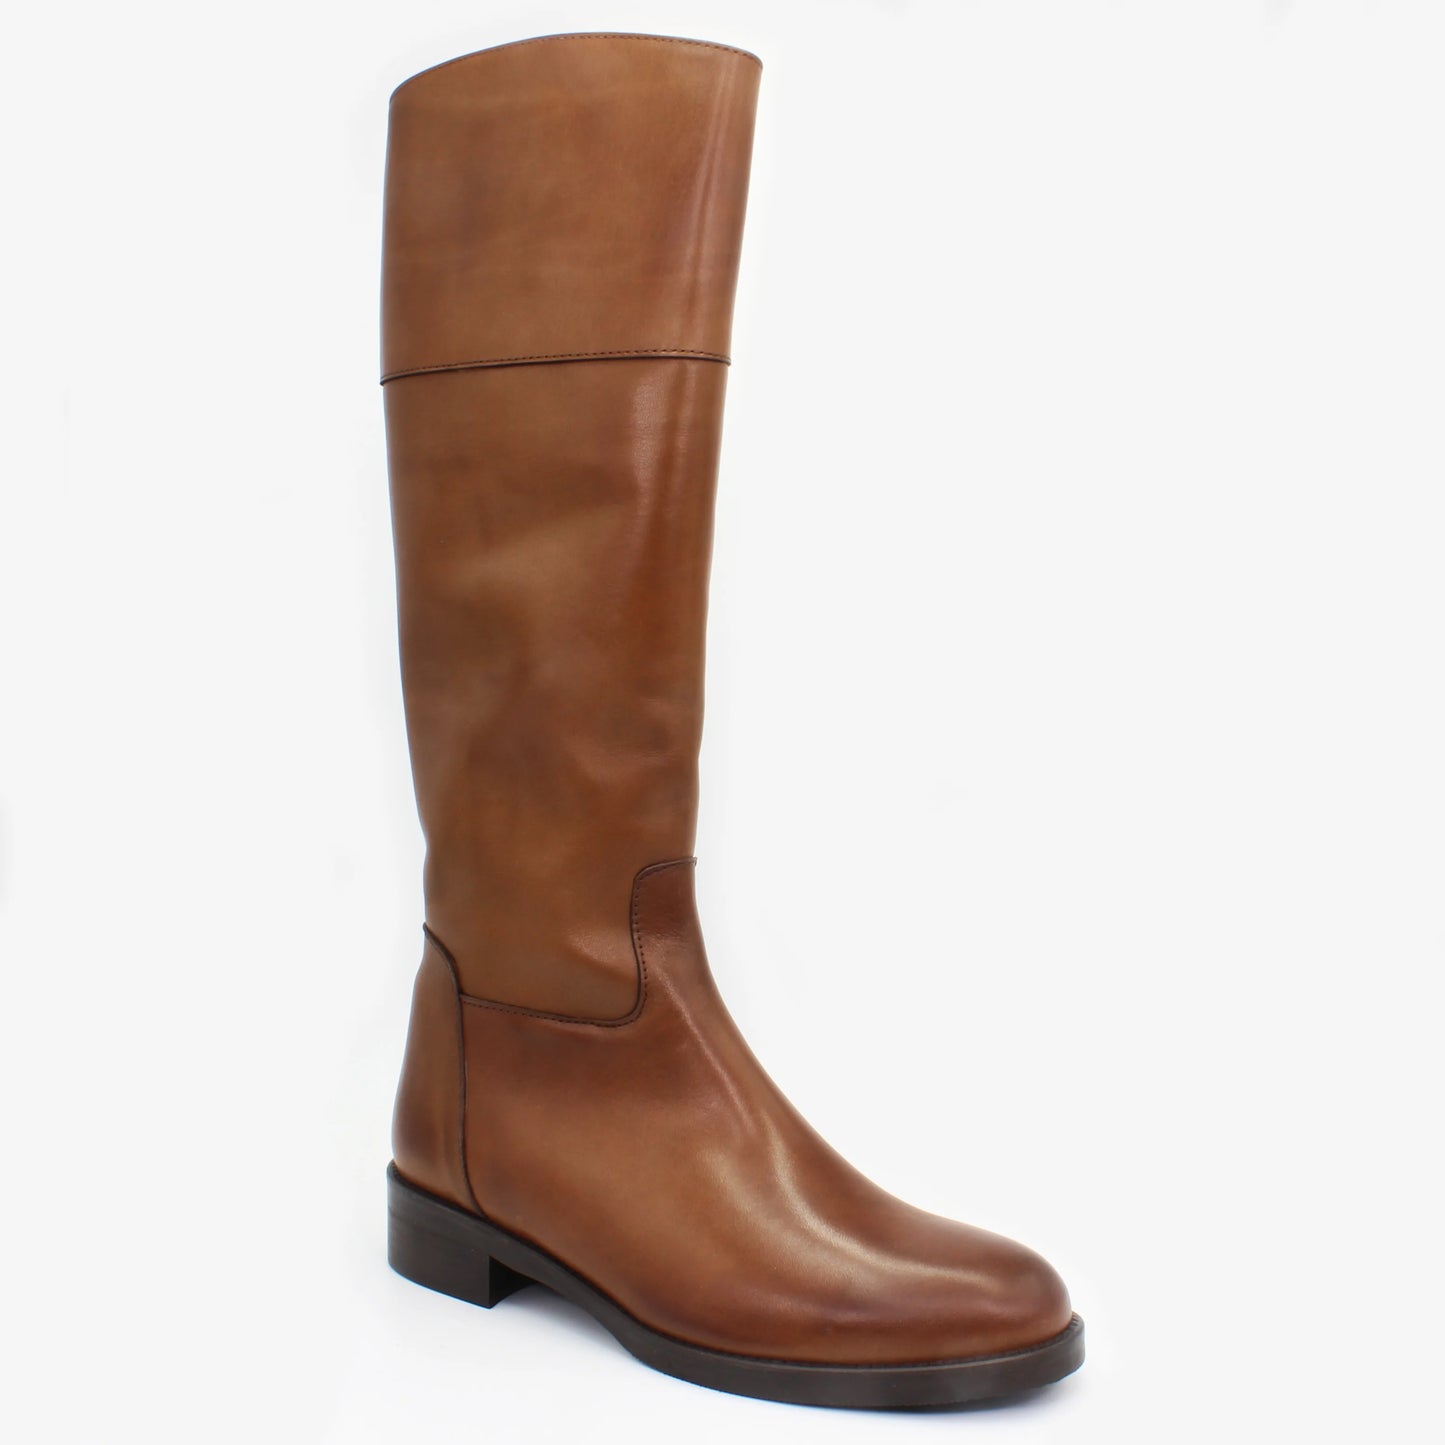 Shop Handmade Italian Leather Equestrian Boot in Tabacco (GC5904) or browse our range of hand-made Italian boots for women in leather or suede in-store at Aliverti  Cape Town, or shop online. We deliver in South Africa & offer multiple payment plans as well as accept multiple safe & secure payment methods.